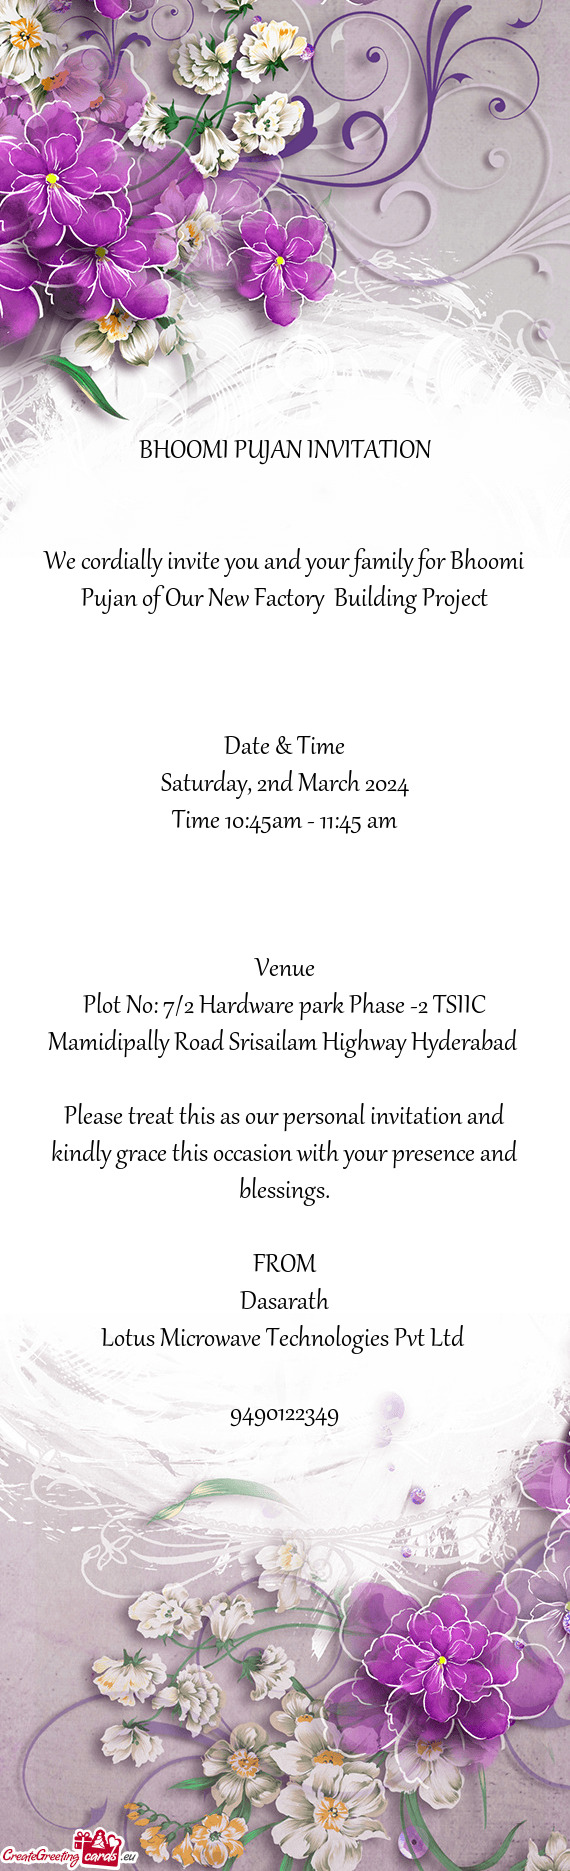 We cordially invite you and your family for Bhoomi Pujan of Our New Factory Building Project